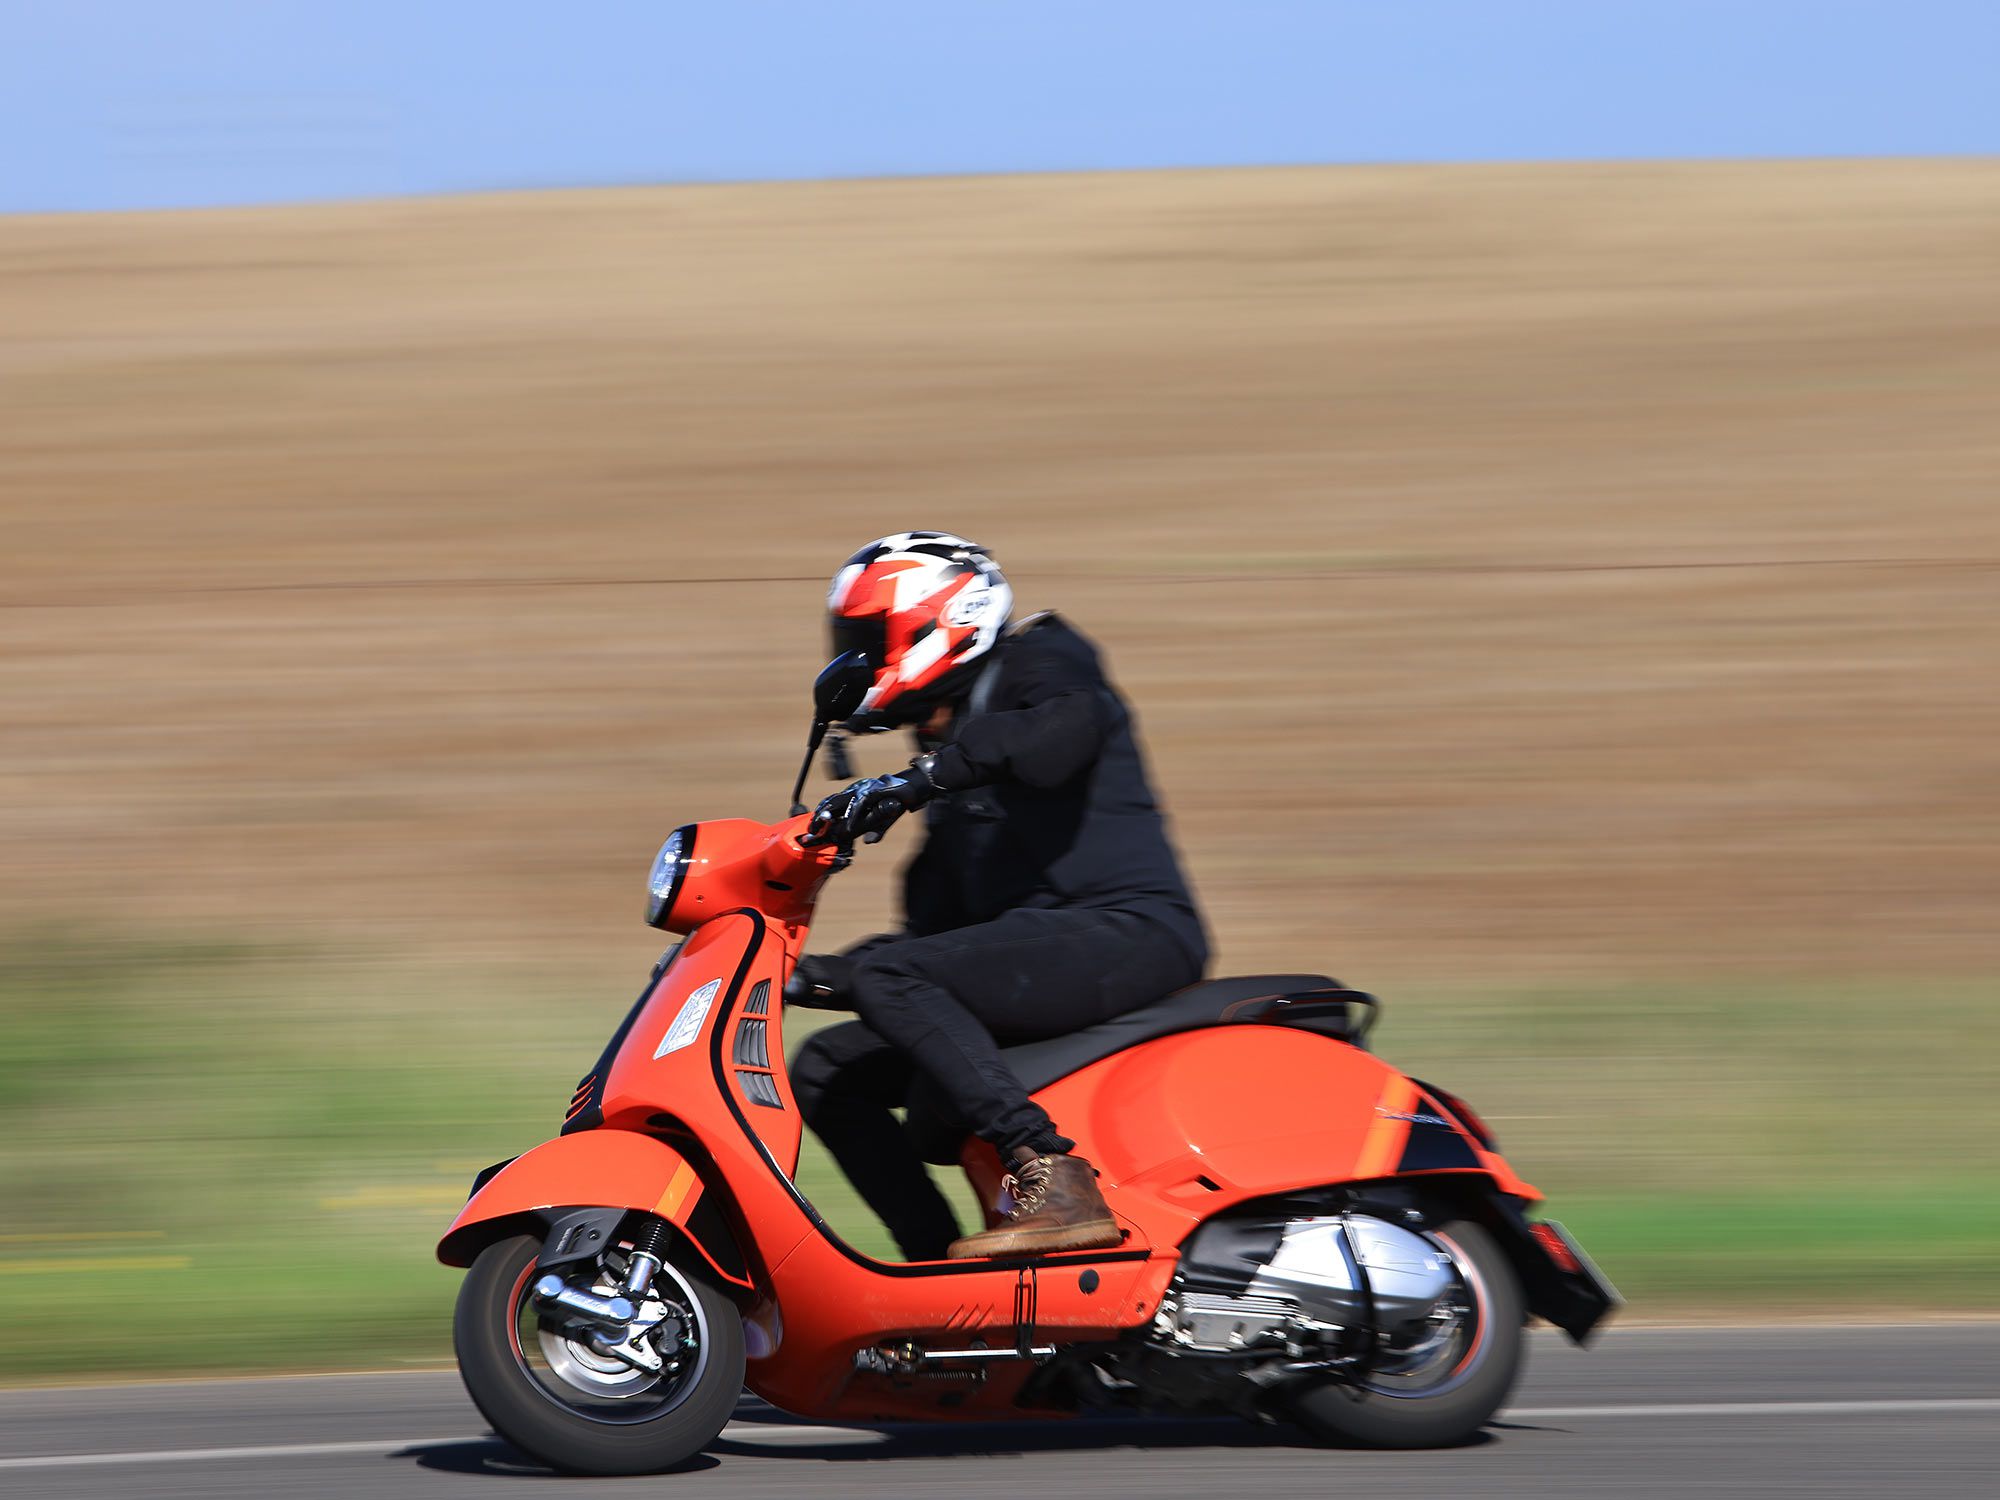 The 278cc single-cylinder GTS 300 has plenty of pep to get you in or out of town, with a top speed of 77 mph.